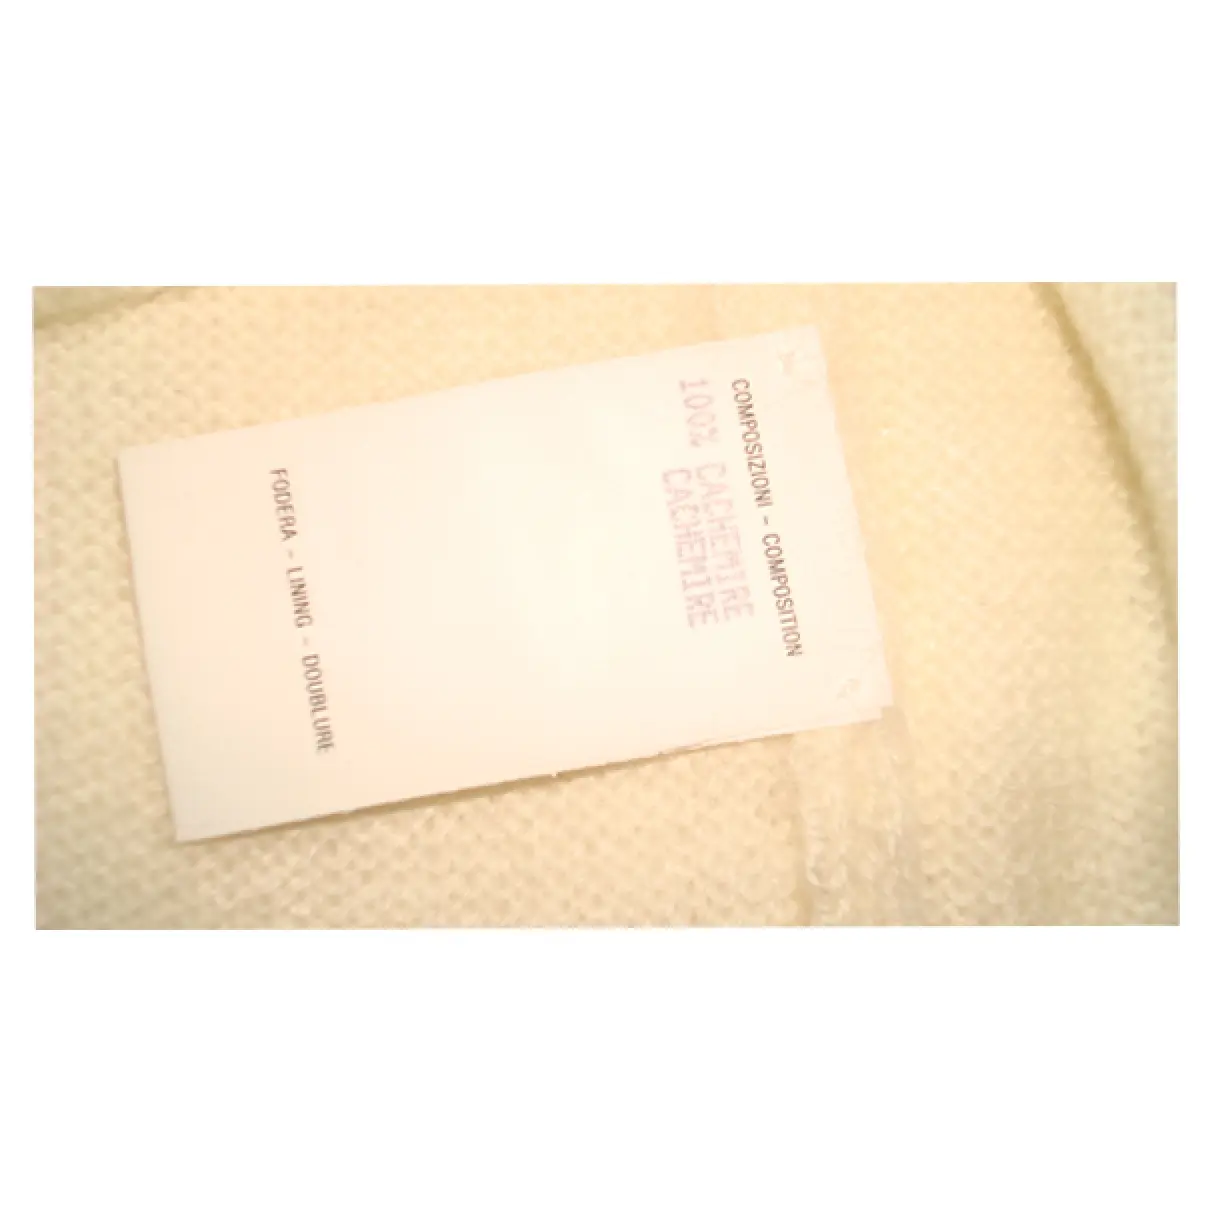 Buy Gucci White Cashmere Knitwear online